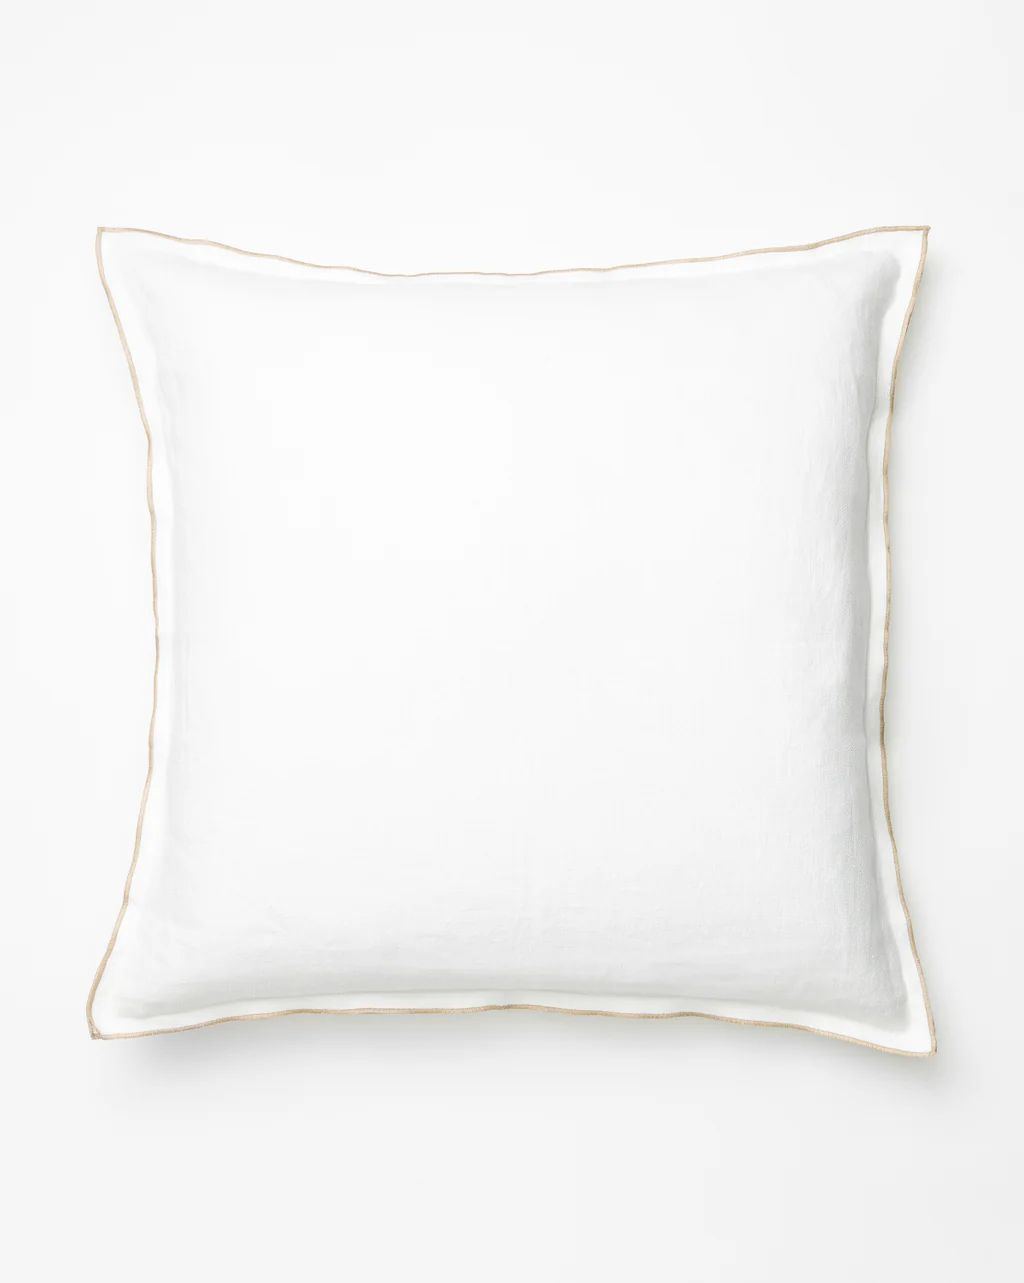 Arla Double Flange Pillow Cover | McGee & Co.